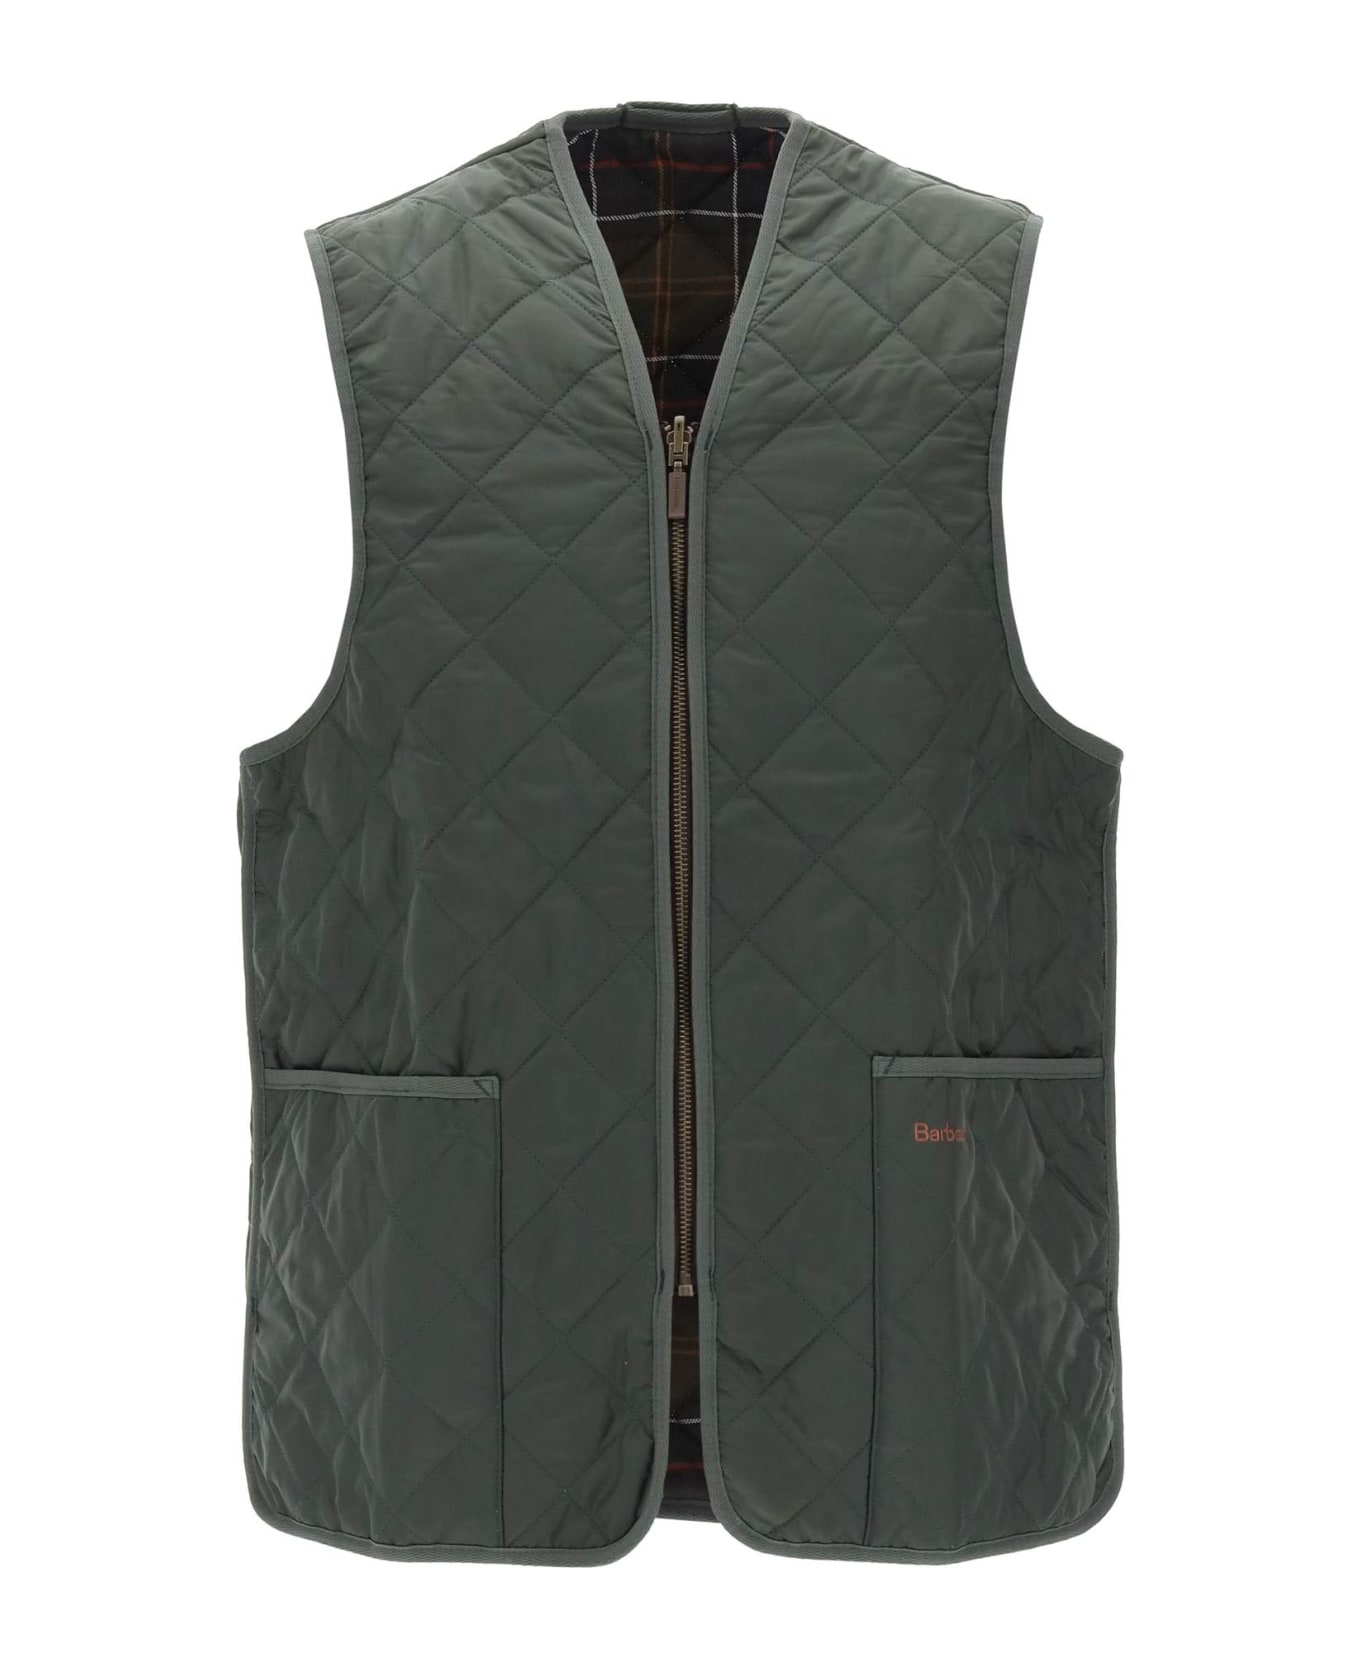 Barbour Quilted Vest - Olive Classic